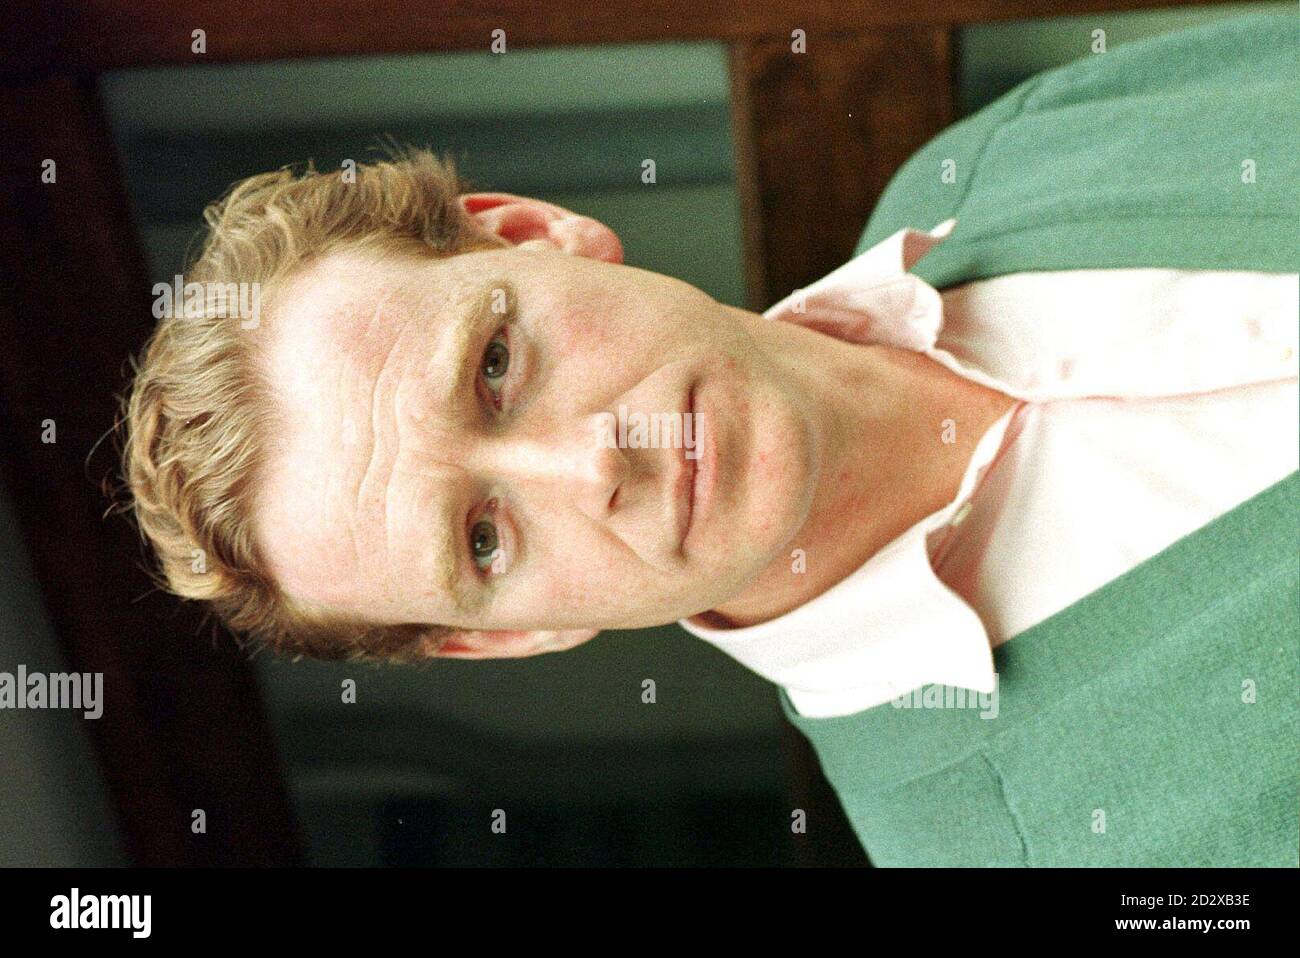 James Hewitt at his home in Bratton Clovelly, Devon, today (Tuesday) following the publication in a national newspaper of stills from a video film allegedly showing him cavorting with the Princess of Wales. Photo Barry Batchelor/PA Stock Photo